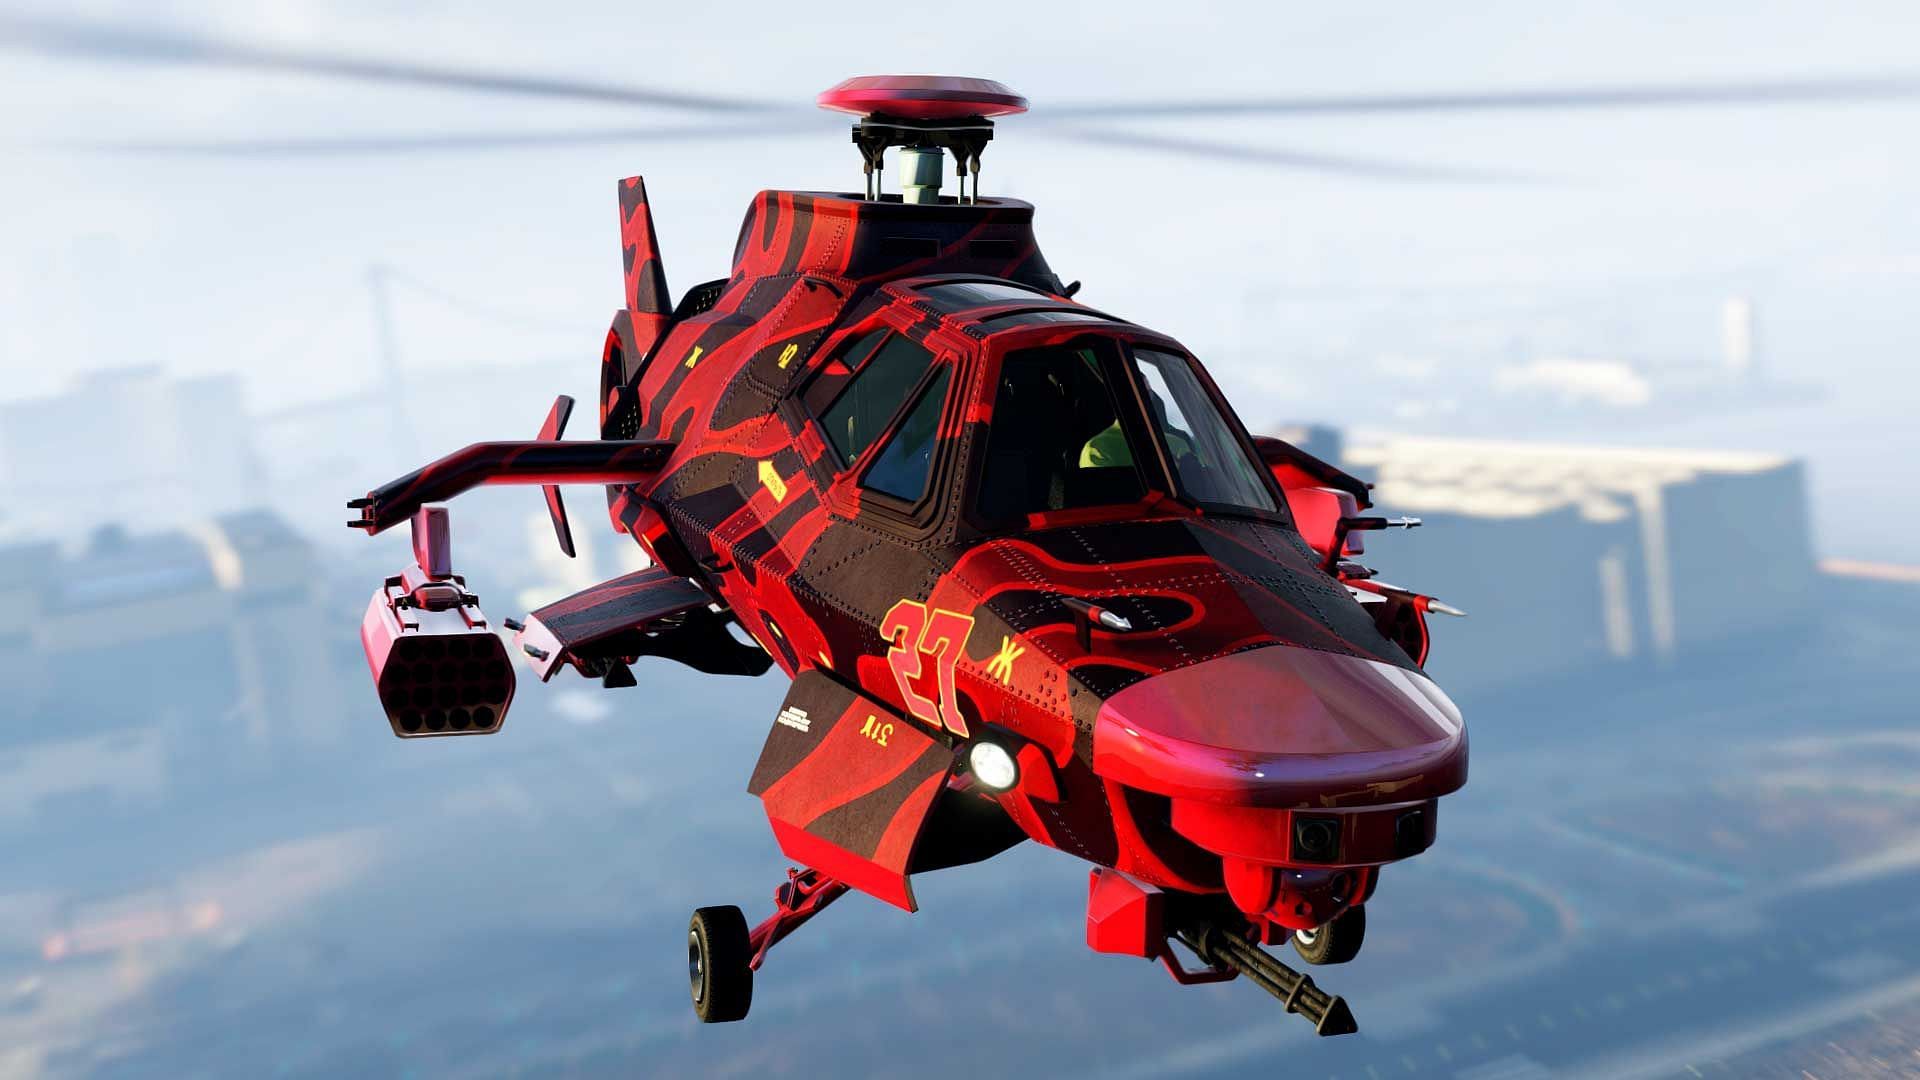 Another screenshot featuring this helicopter (Image via Rockstar Games)